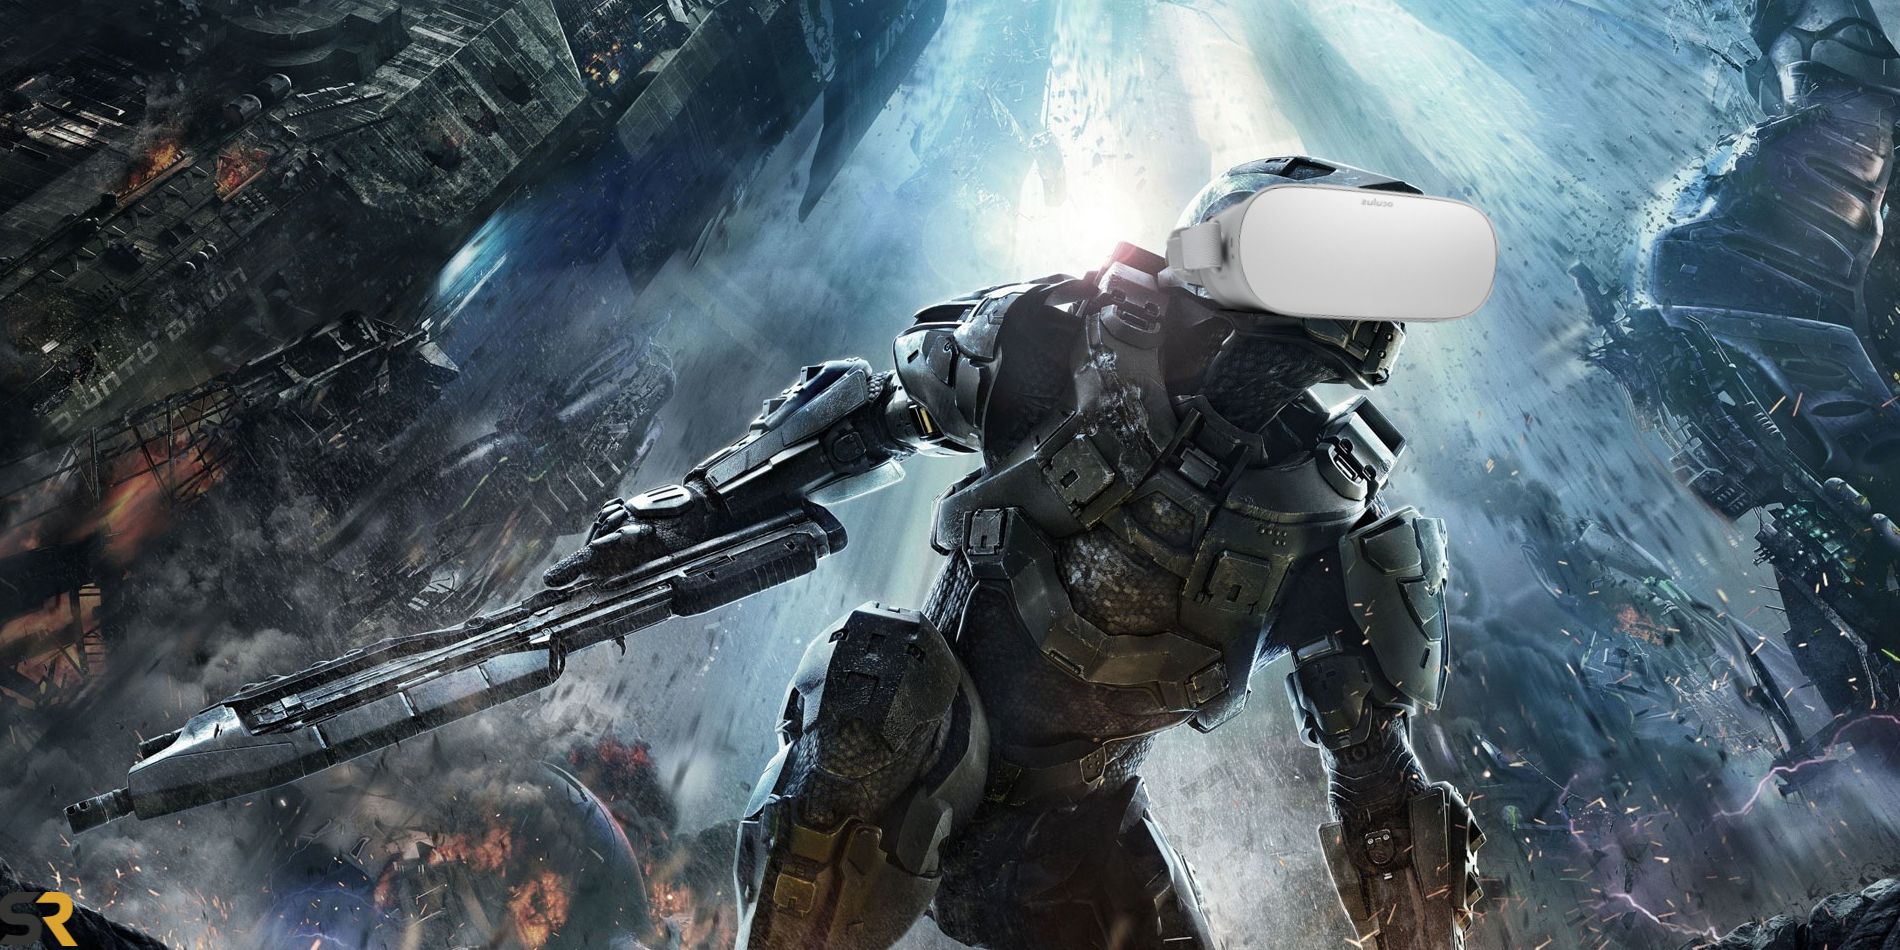 Cancelled Halo VR Project Gameplay Shows Master Chief Virtual Reality Gameplay